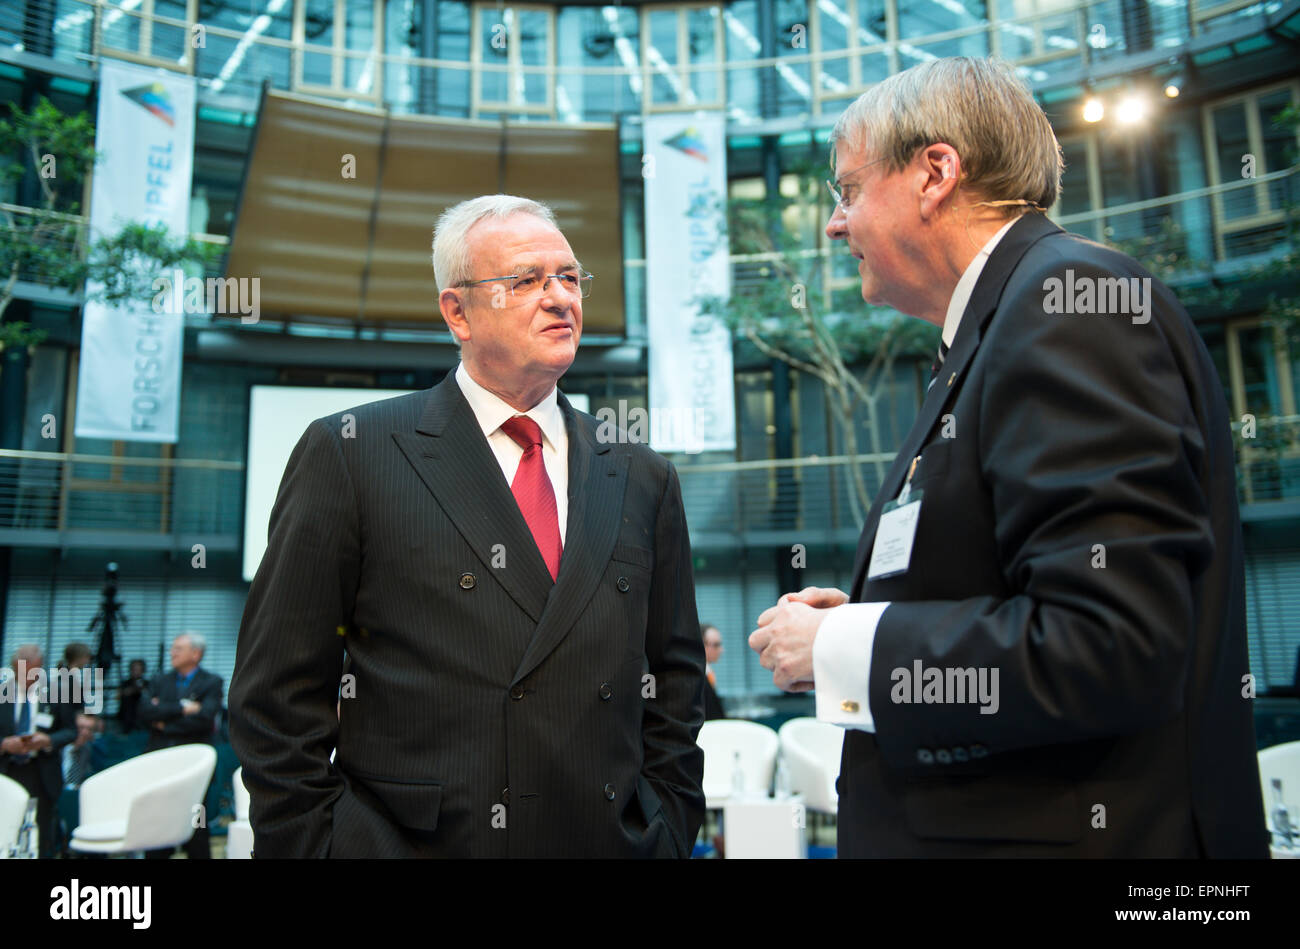 Berlin, Germany. 20th May, 2015. Martin Winterkorn (L), CEO of Volkswagen AG, and Joerg Hacker, President of the German National Academy of Sciences Leopoldina, converse at the 'Research Summit 2015 - Perspectives for Economy, Science, and Innovation' in Berlin, Germany, 2015. At the Research Summit 2015 around 300 leaders and experts in economy, science, politics, and society search for strategies in order to proceed with research and innovation despite the pressure of rising costs. Credit:  dpa picture alliance/Alamy Live News Stock Photo